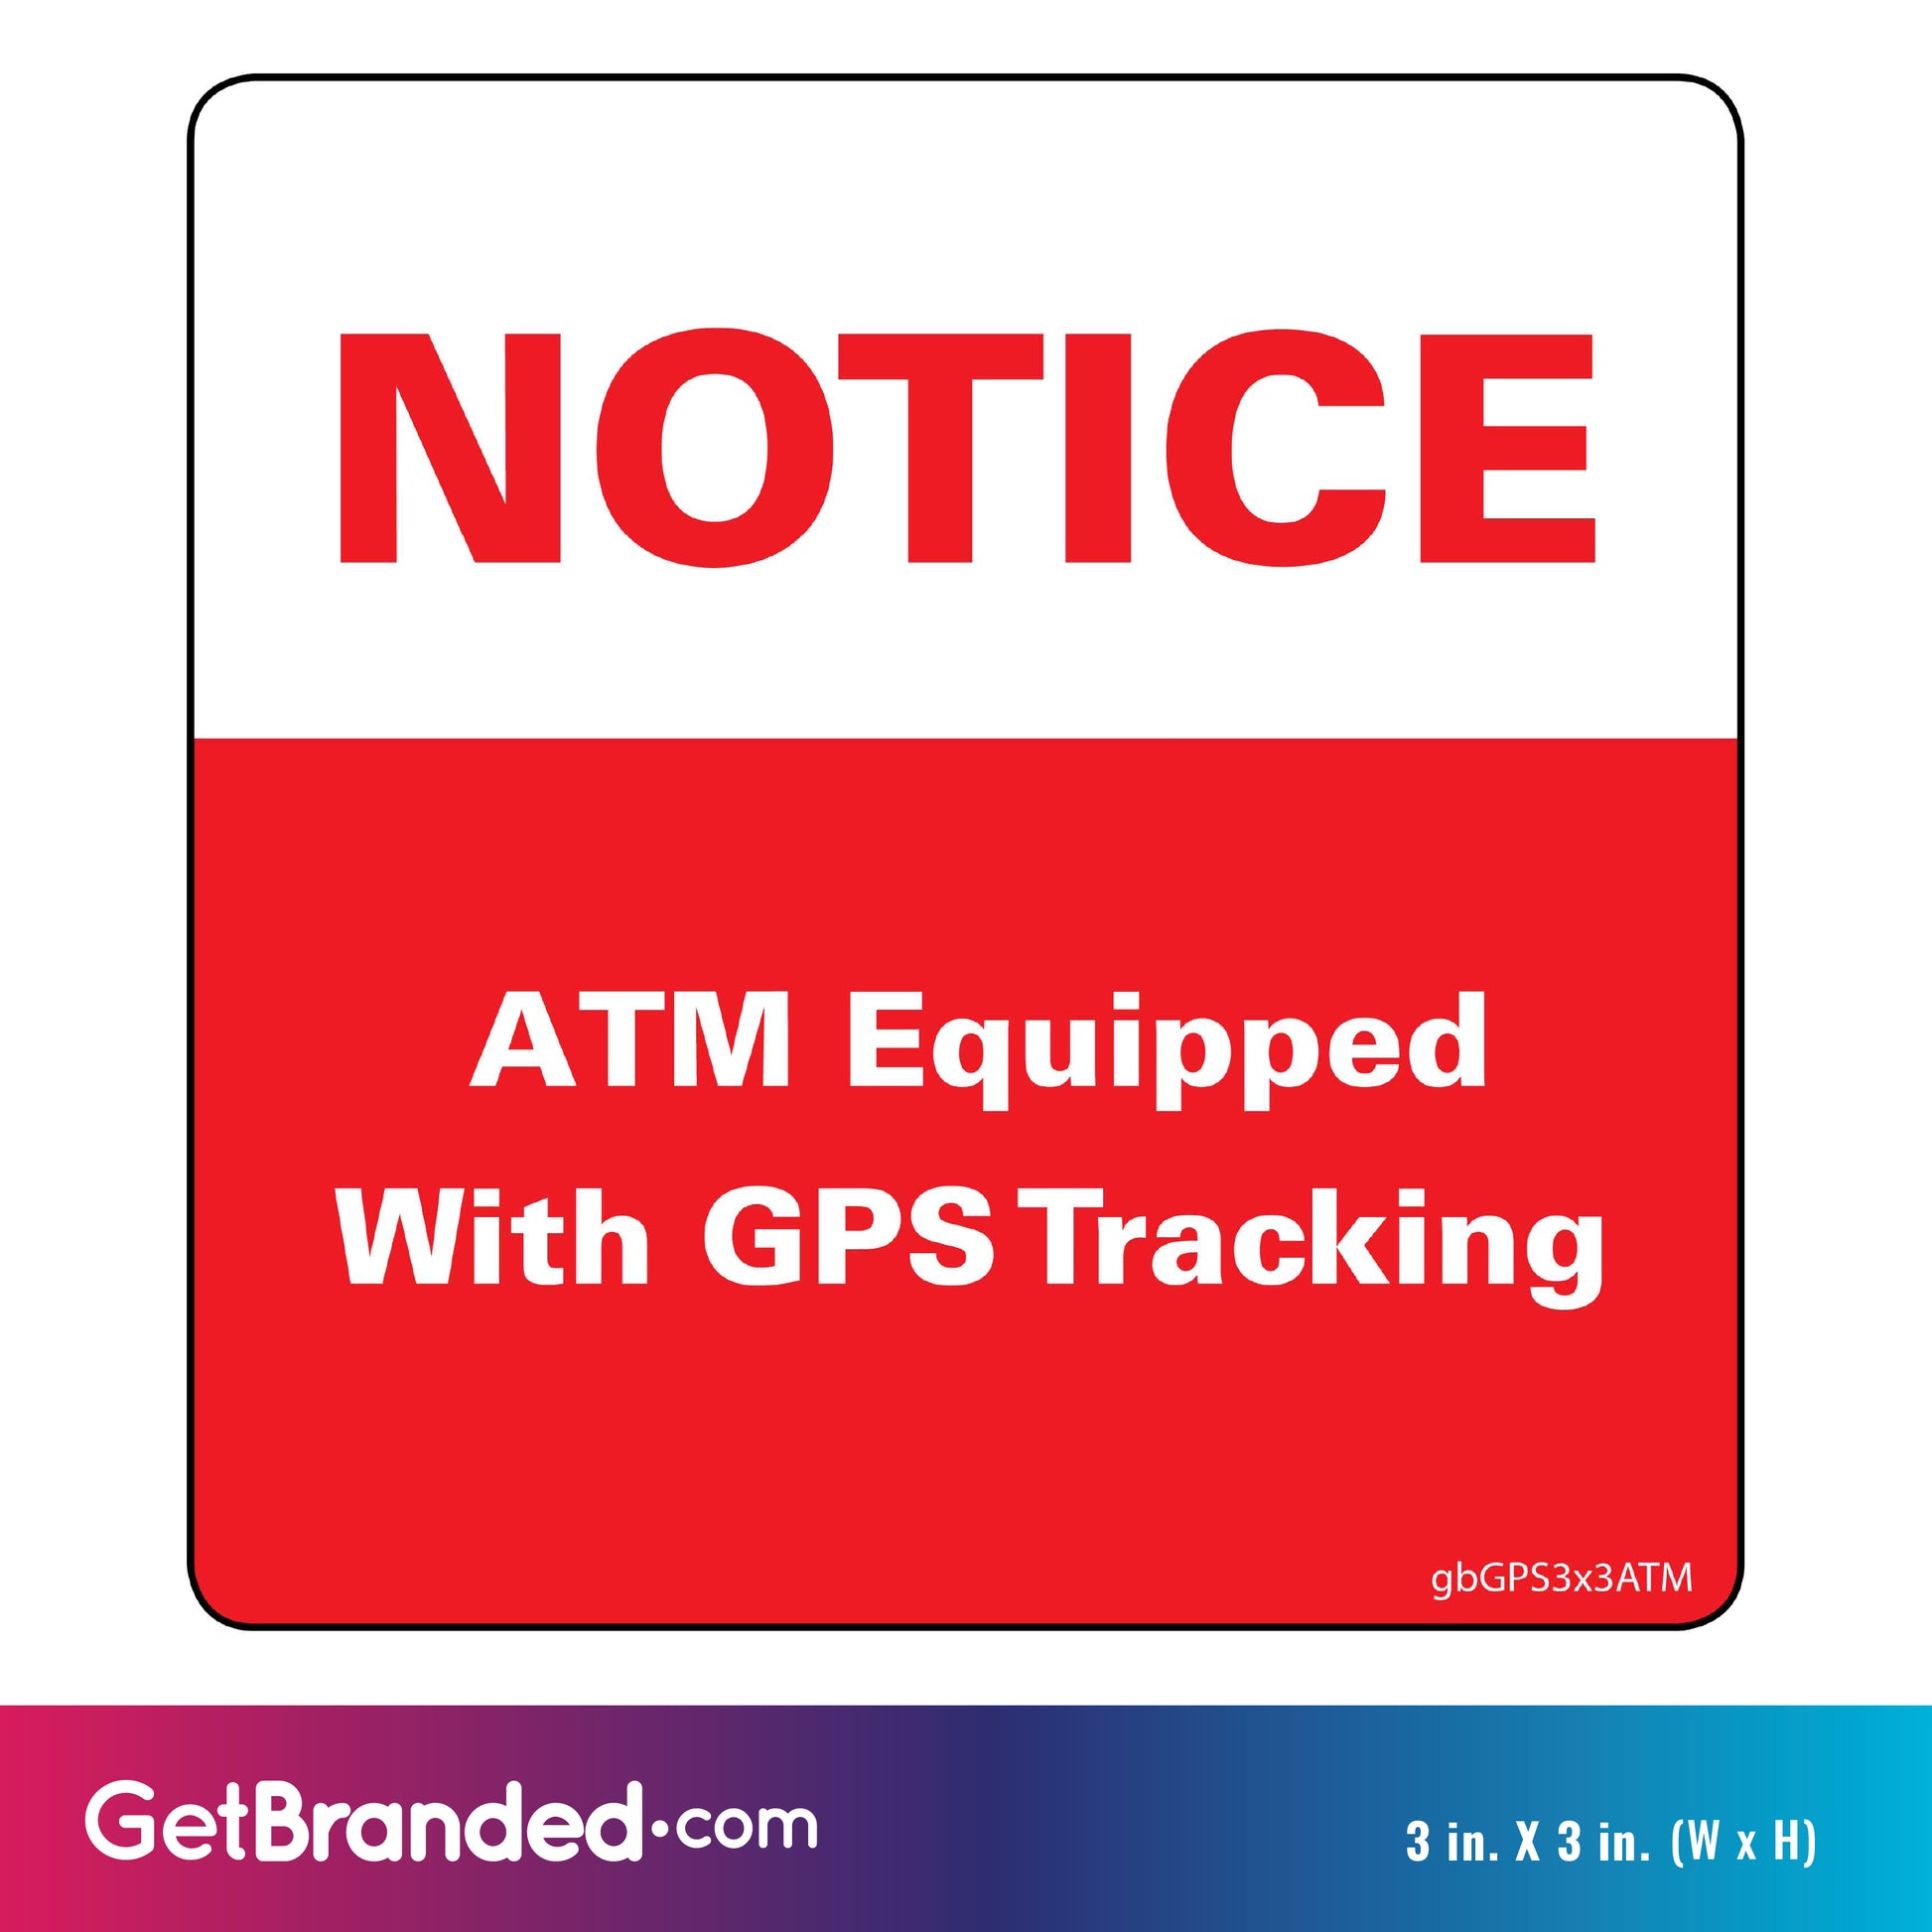 ATM Equipped with GPS Notice Decal size guide. 3 inches by 3 inches in size.